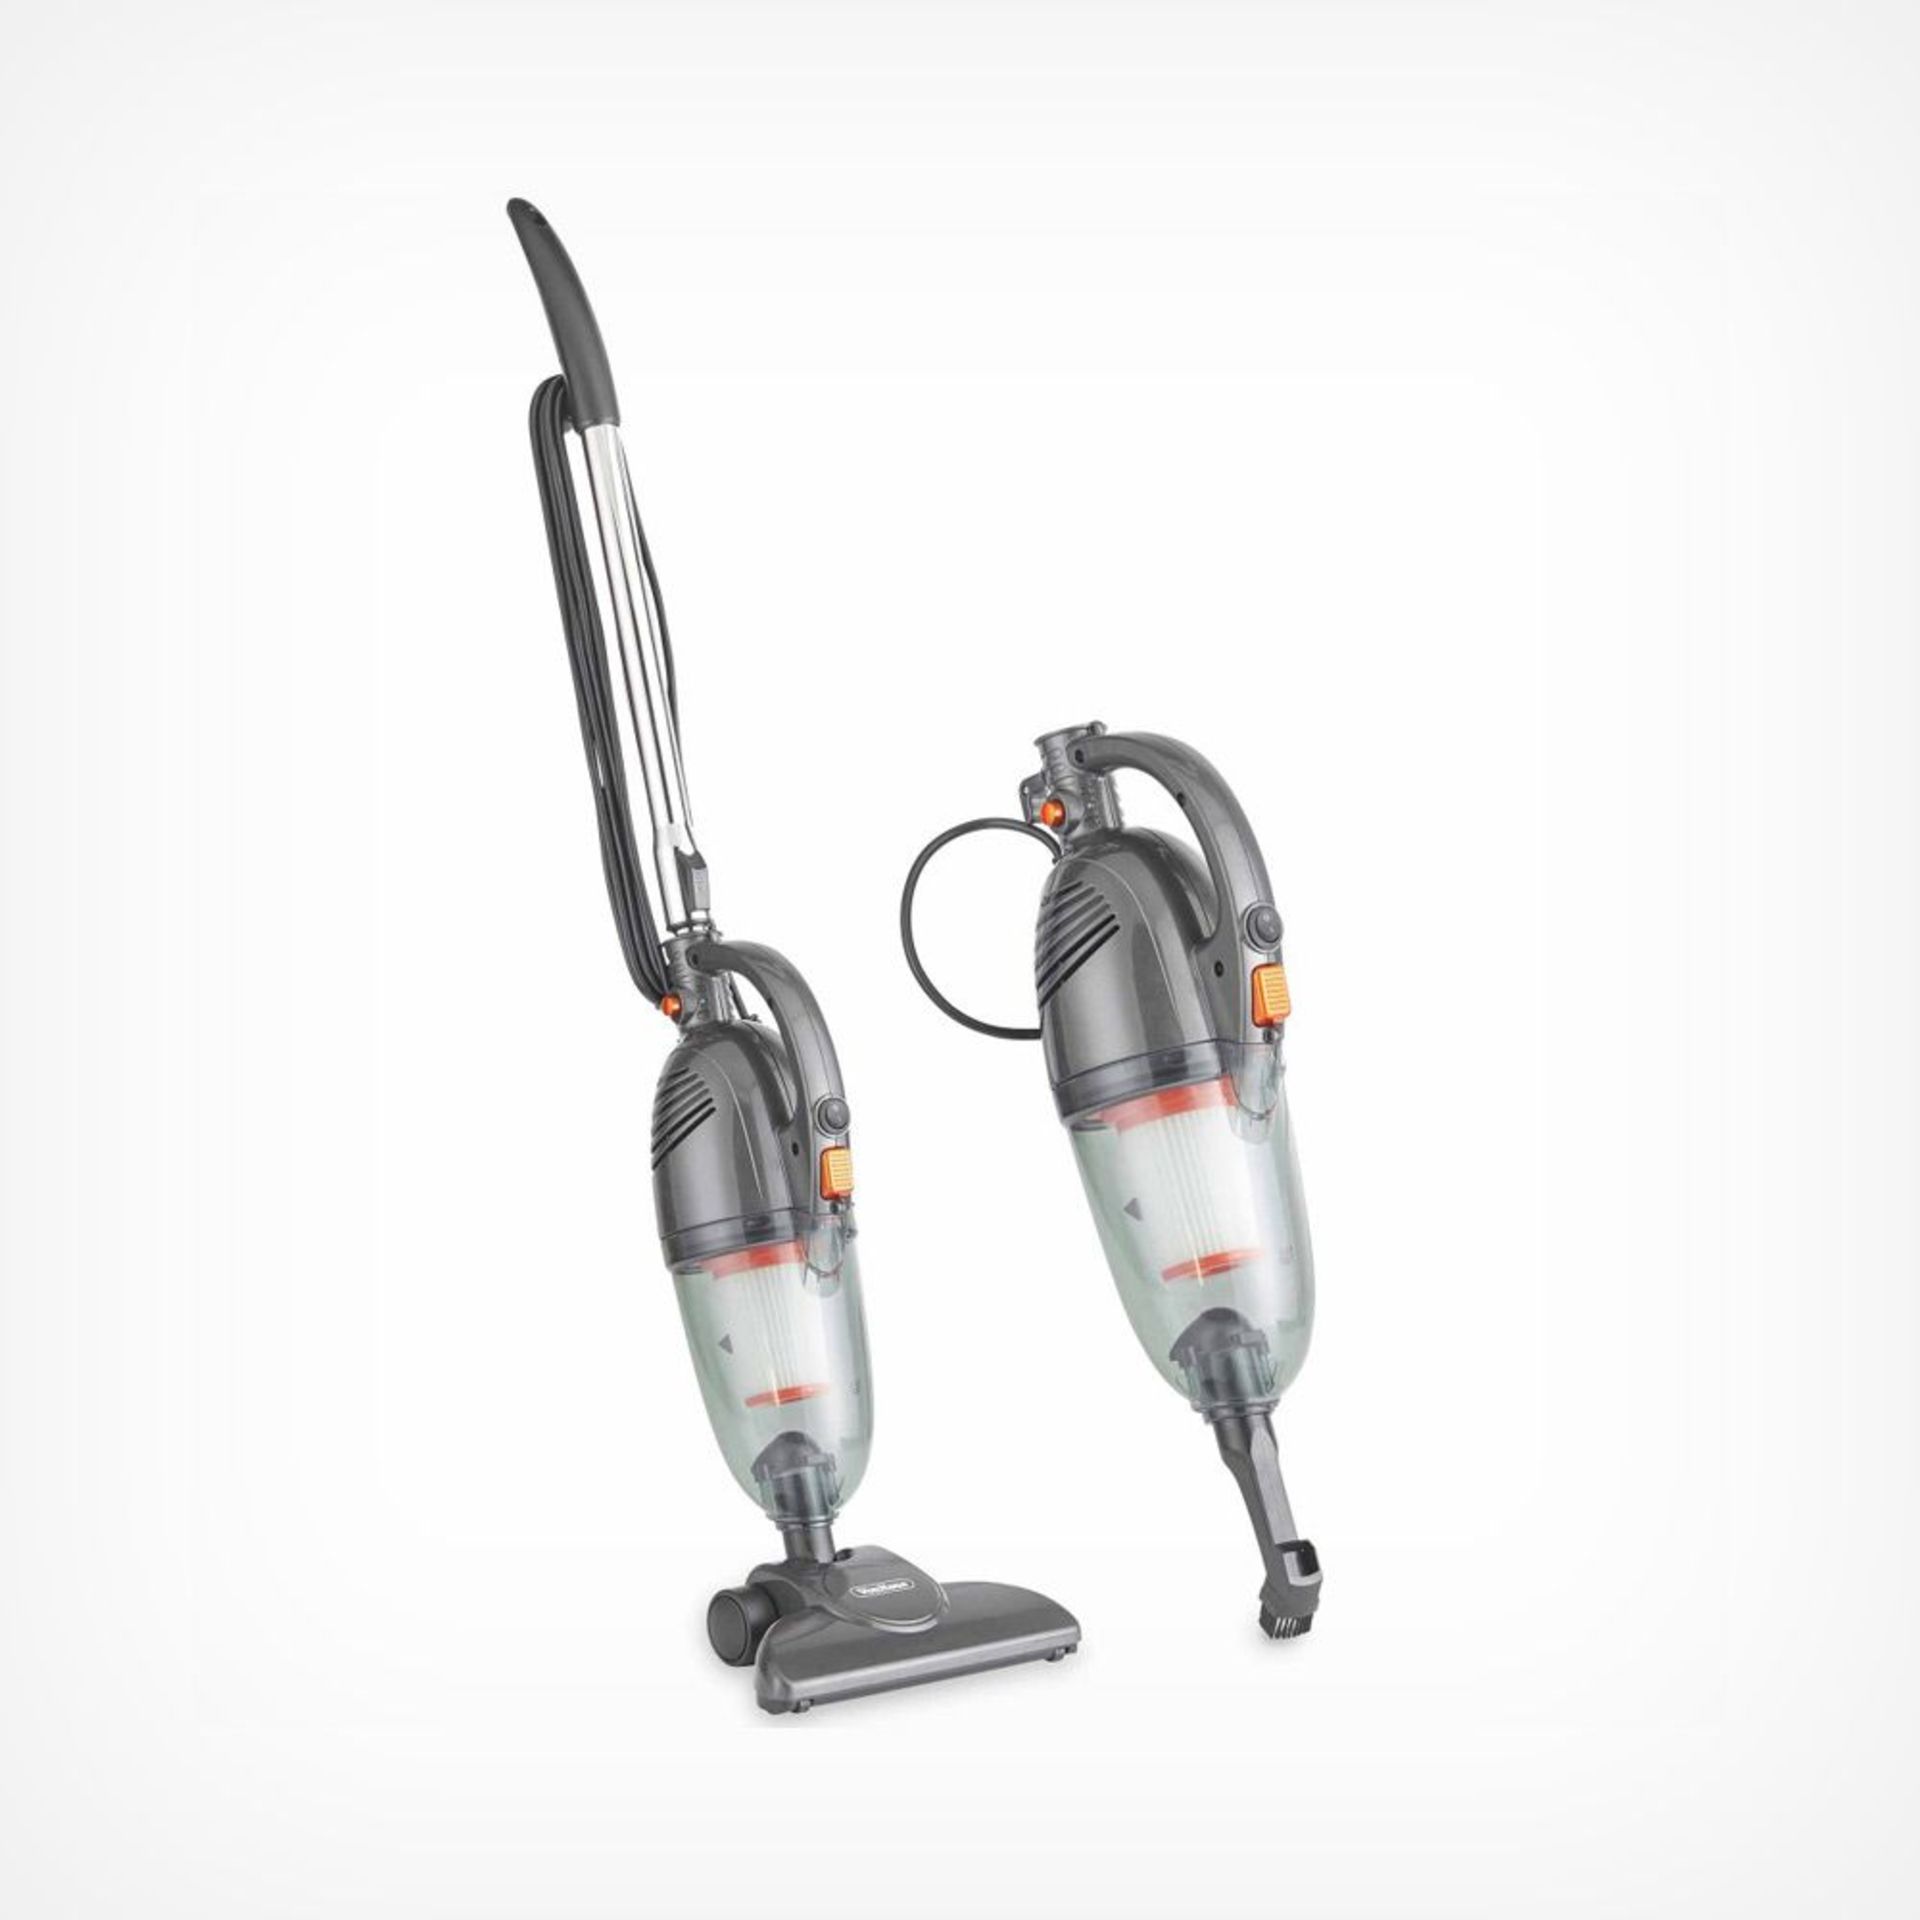 800W Grey 2 in 1 Stick Vacuum. Featuring a super lightweight construction and a low profile base